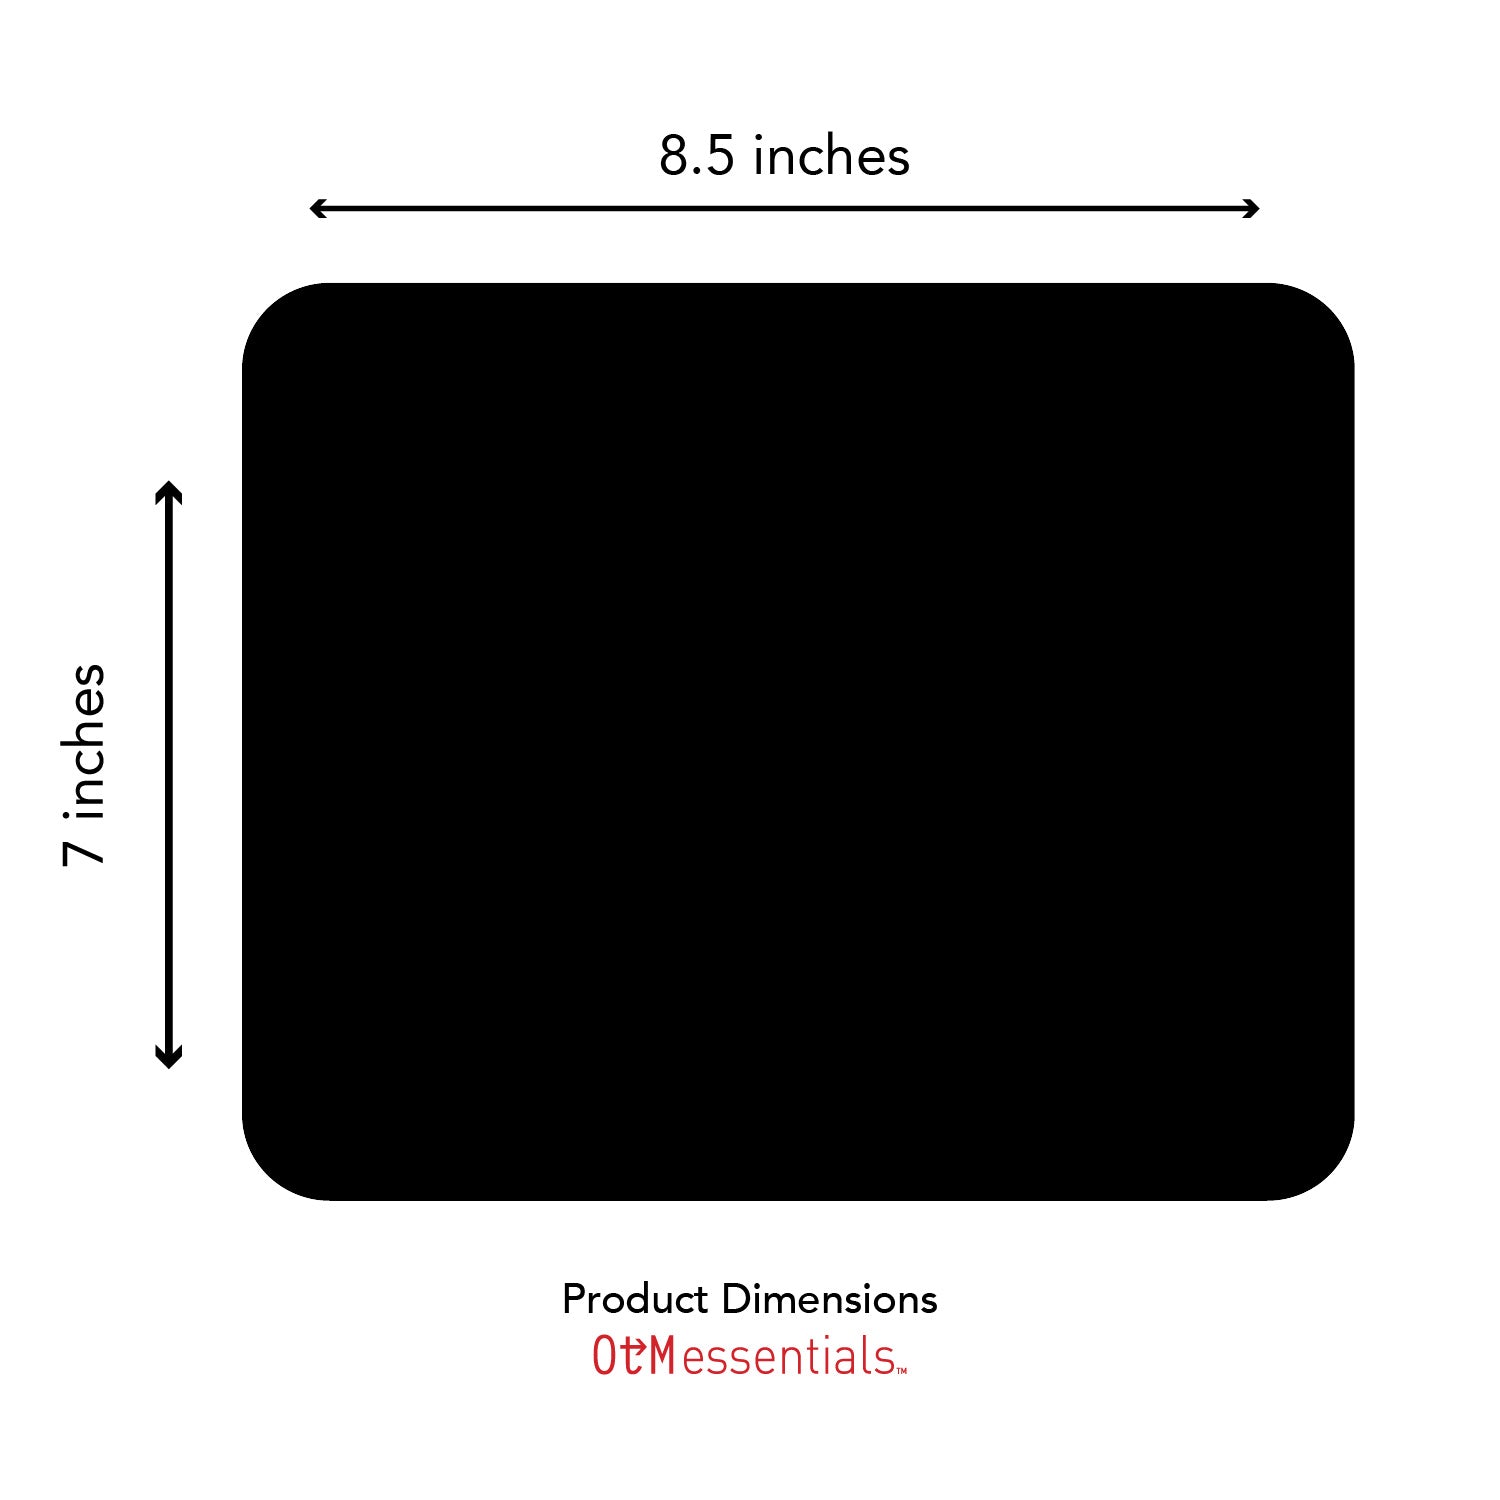 OC-USC4-MH39A, Product Dimensions